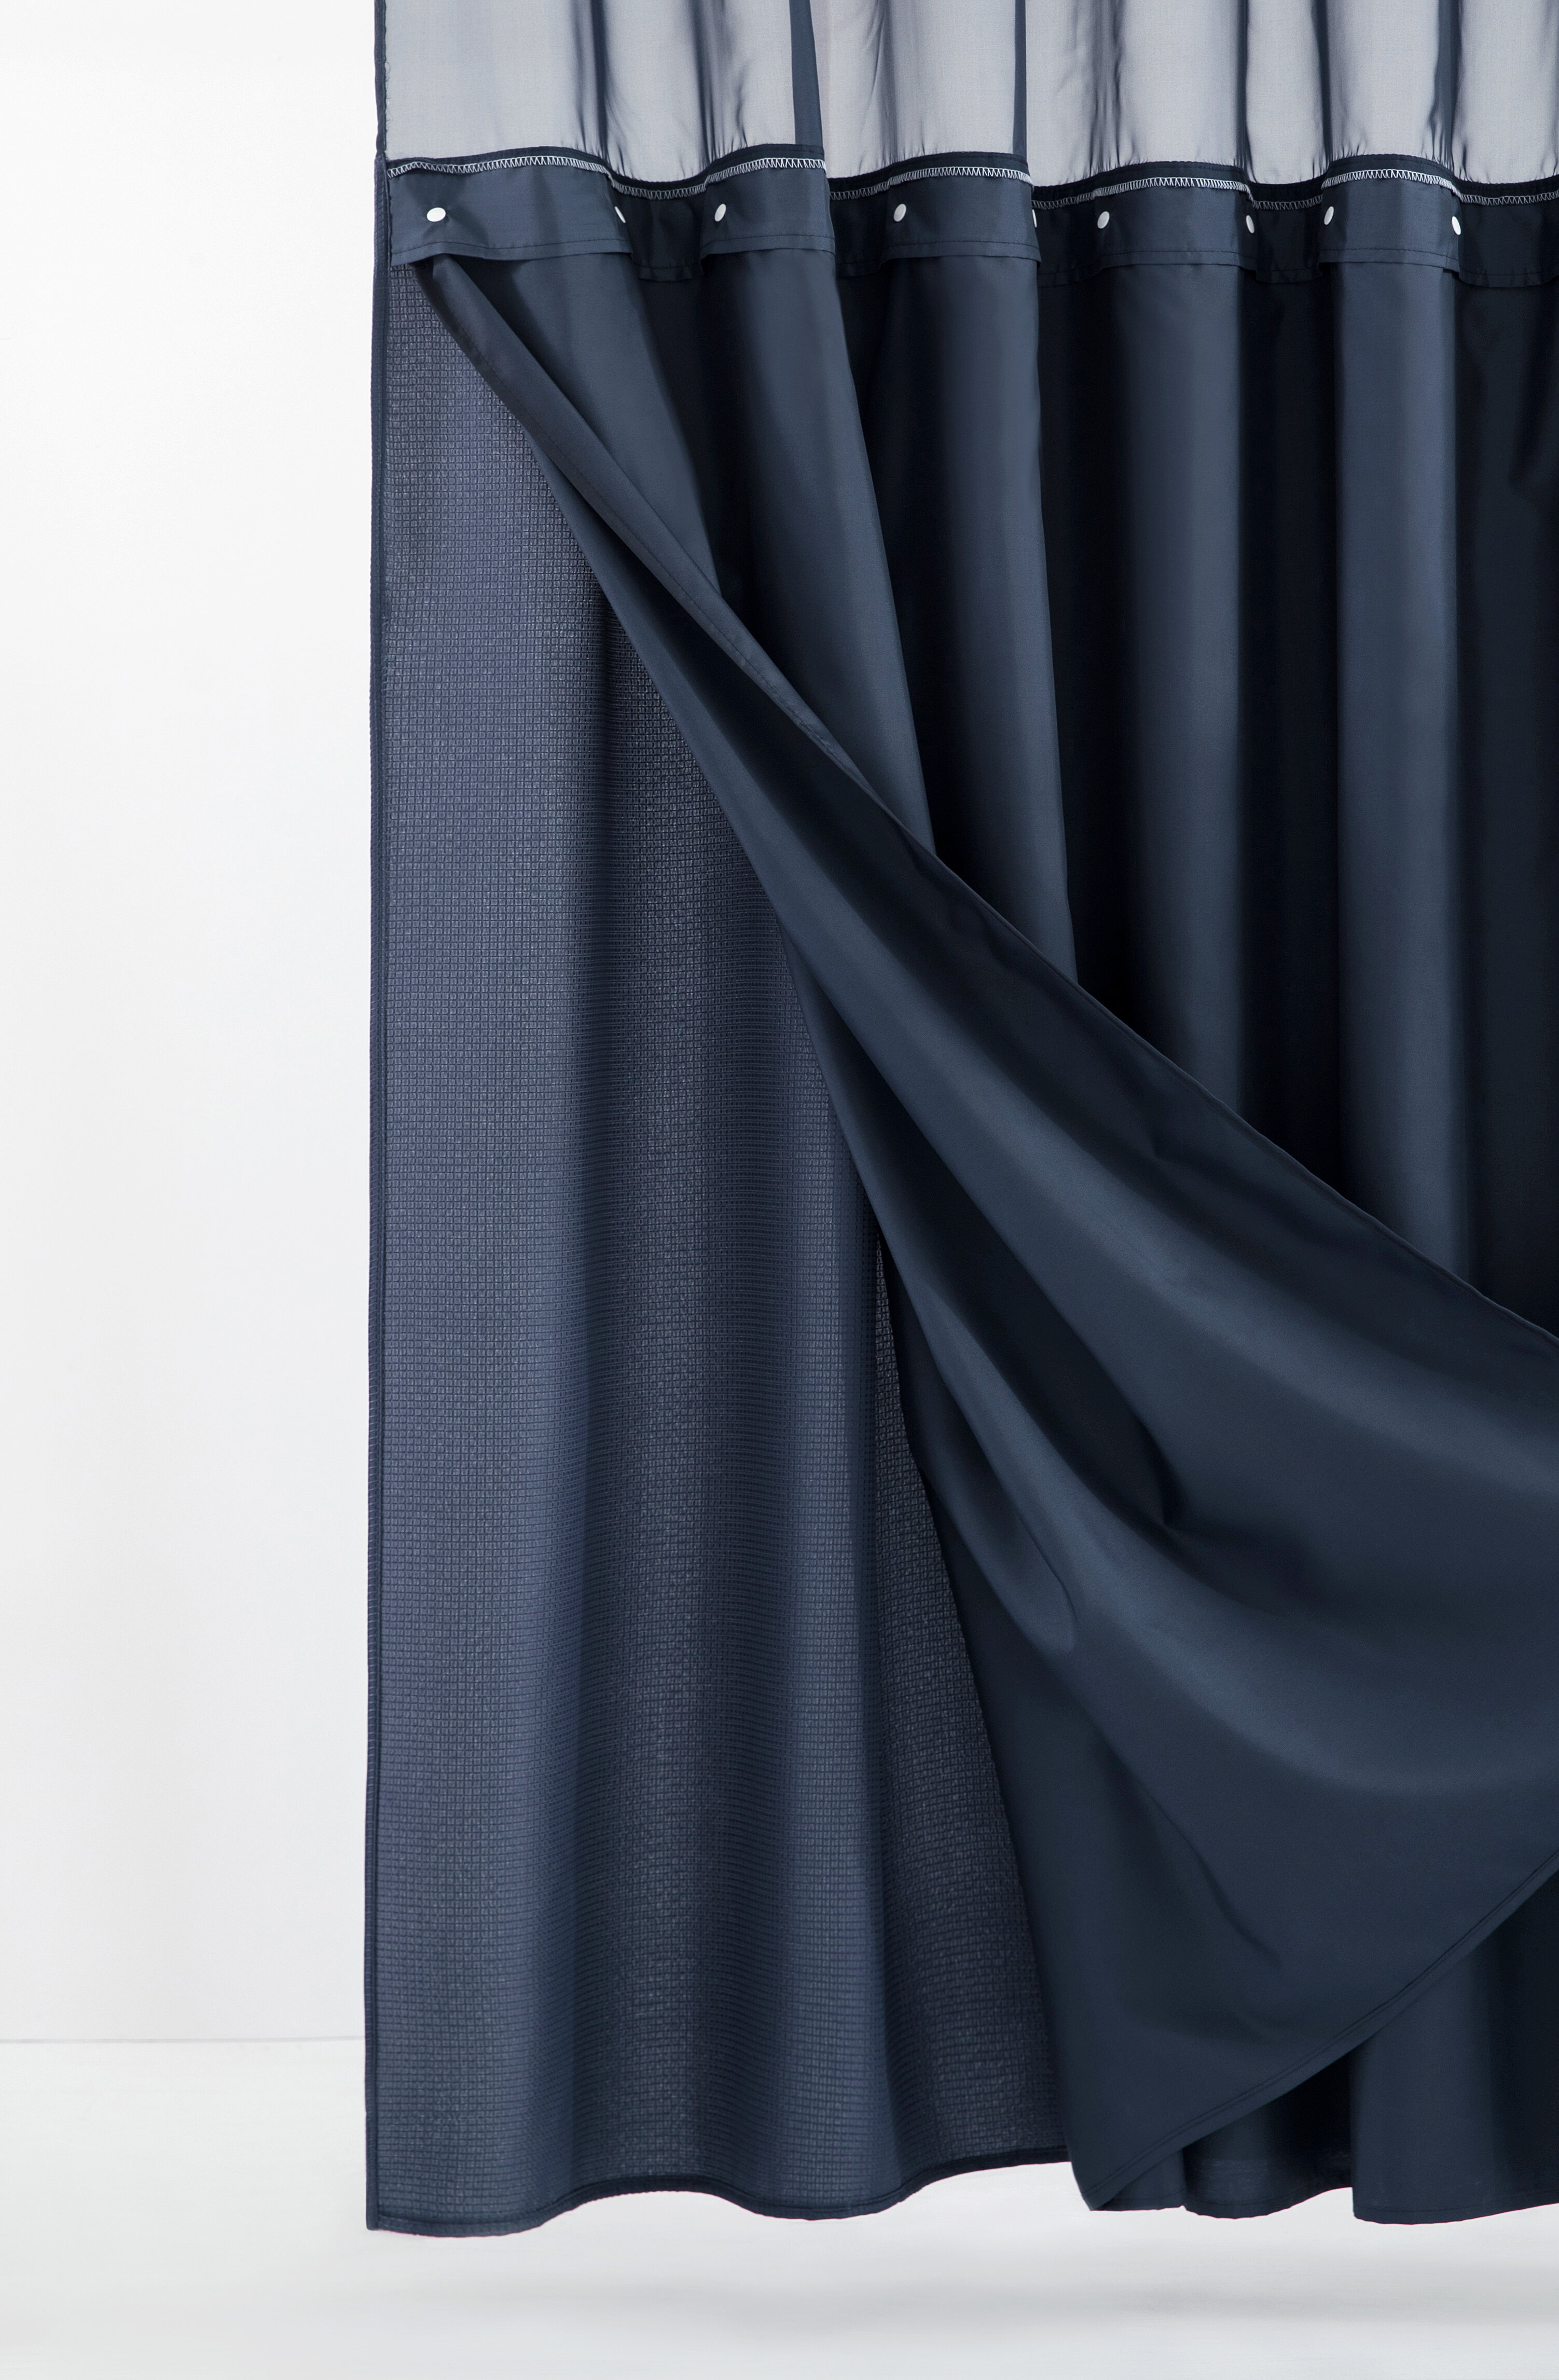 navy blue and yellow shower curtain